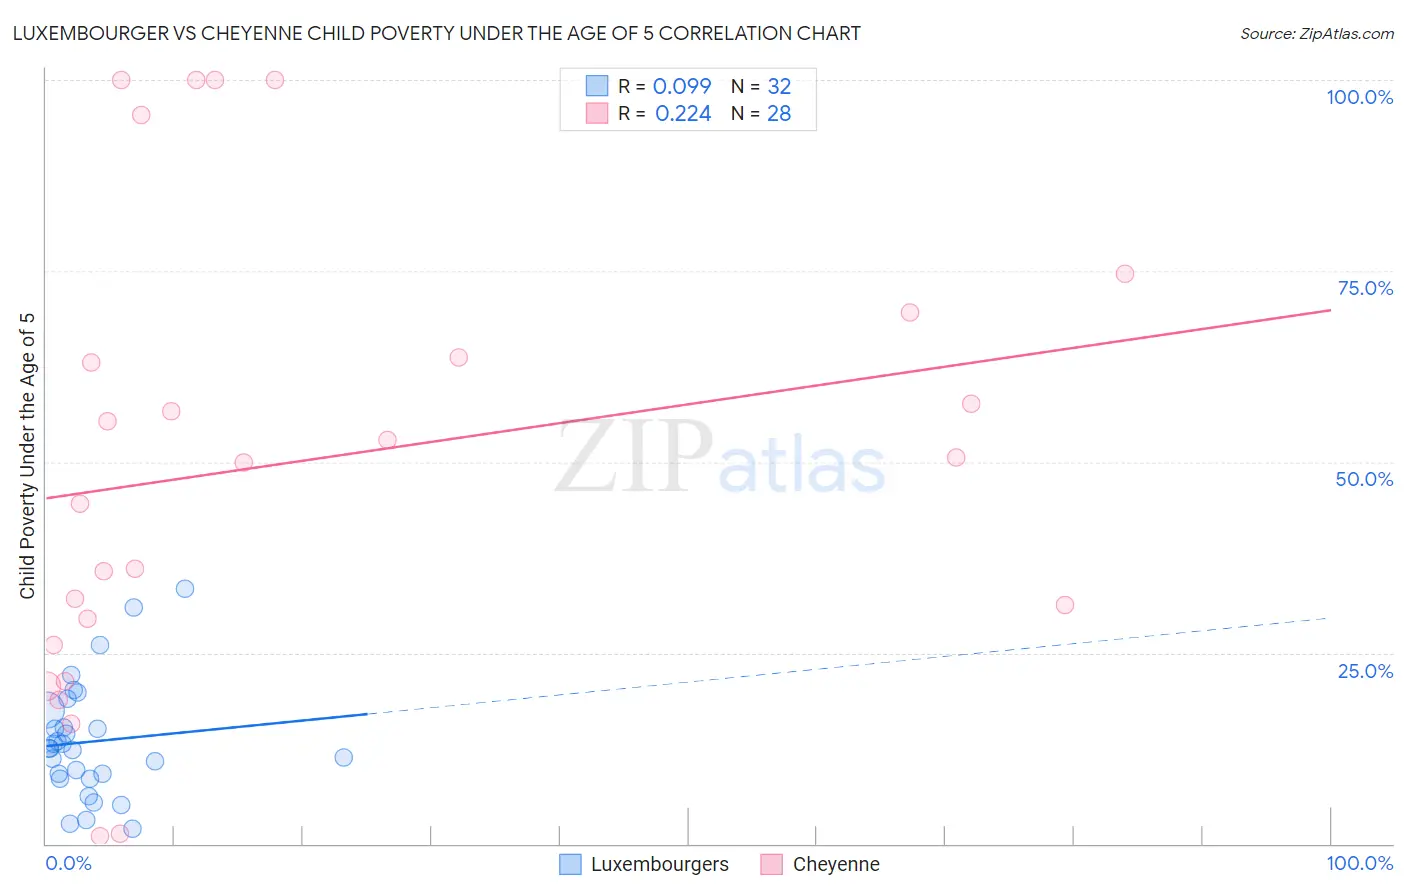 Luxembourger vs Cheyenne Child Poverty Under the Age of 5